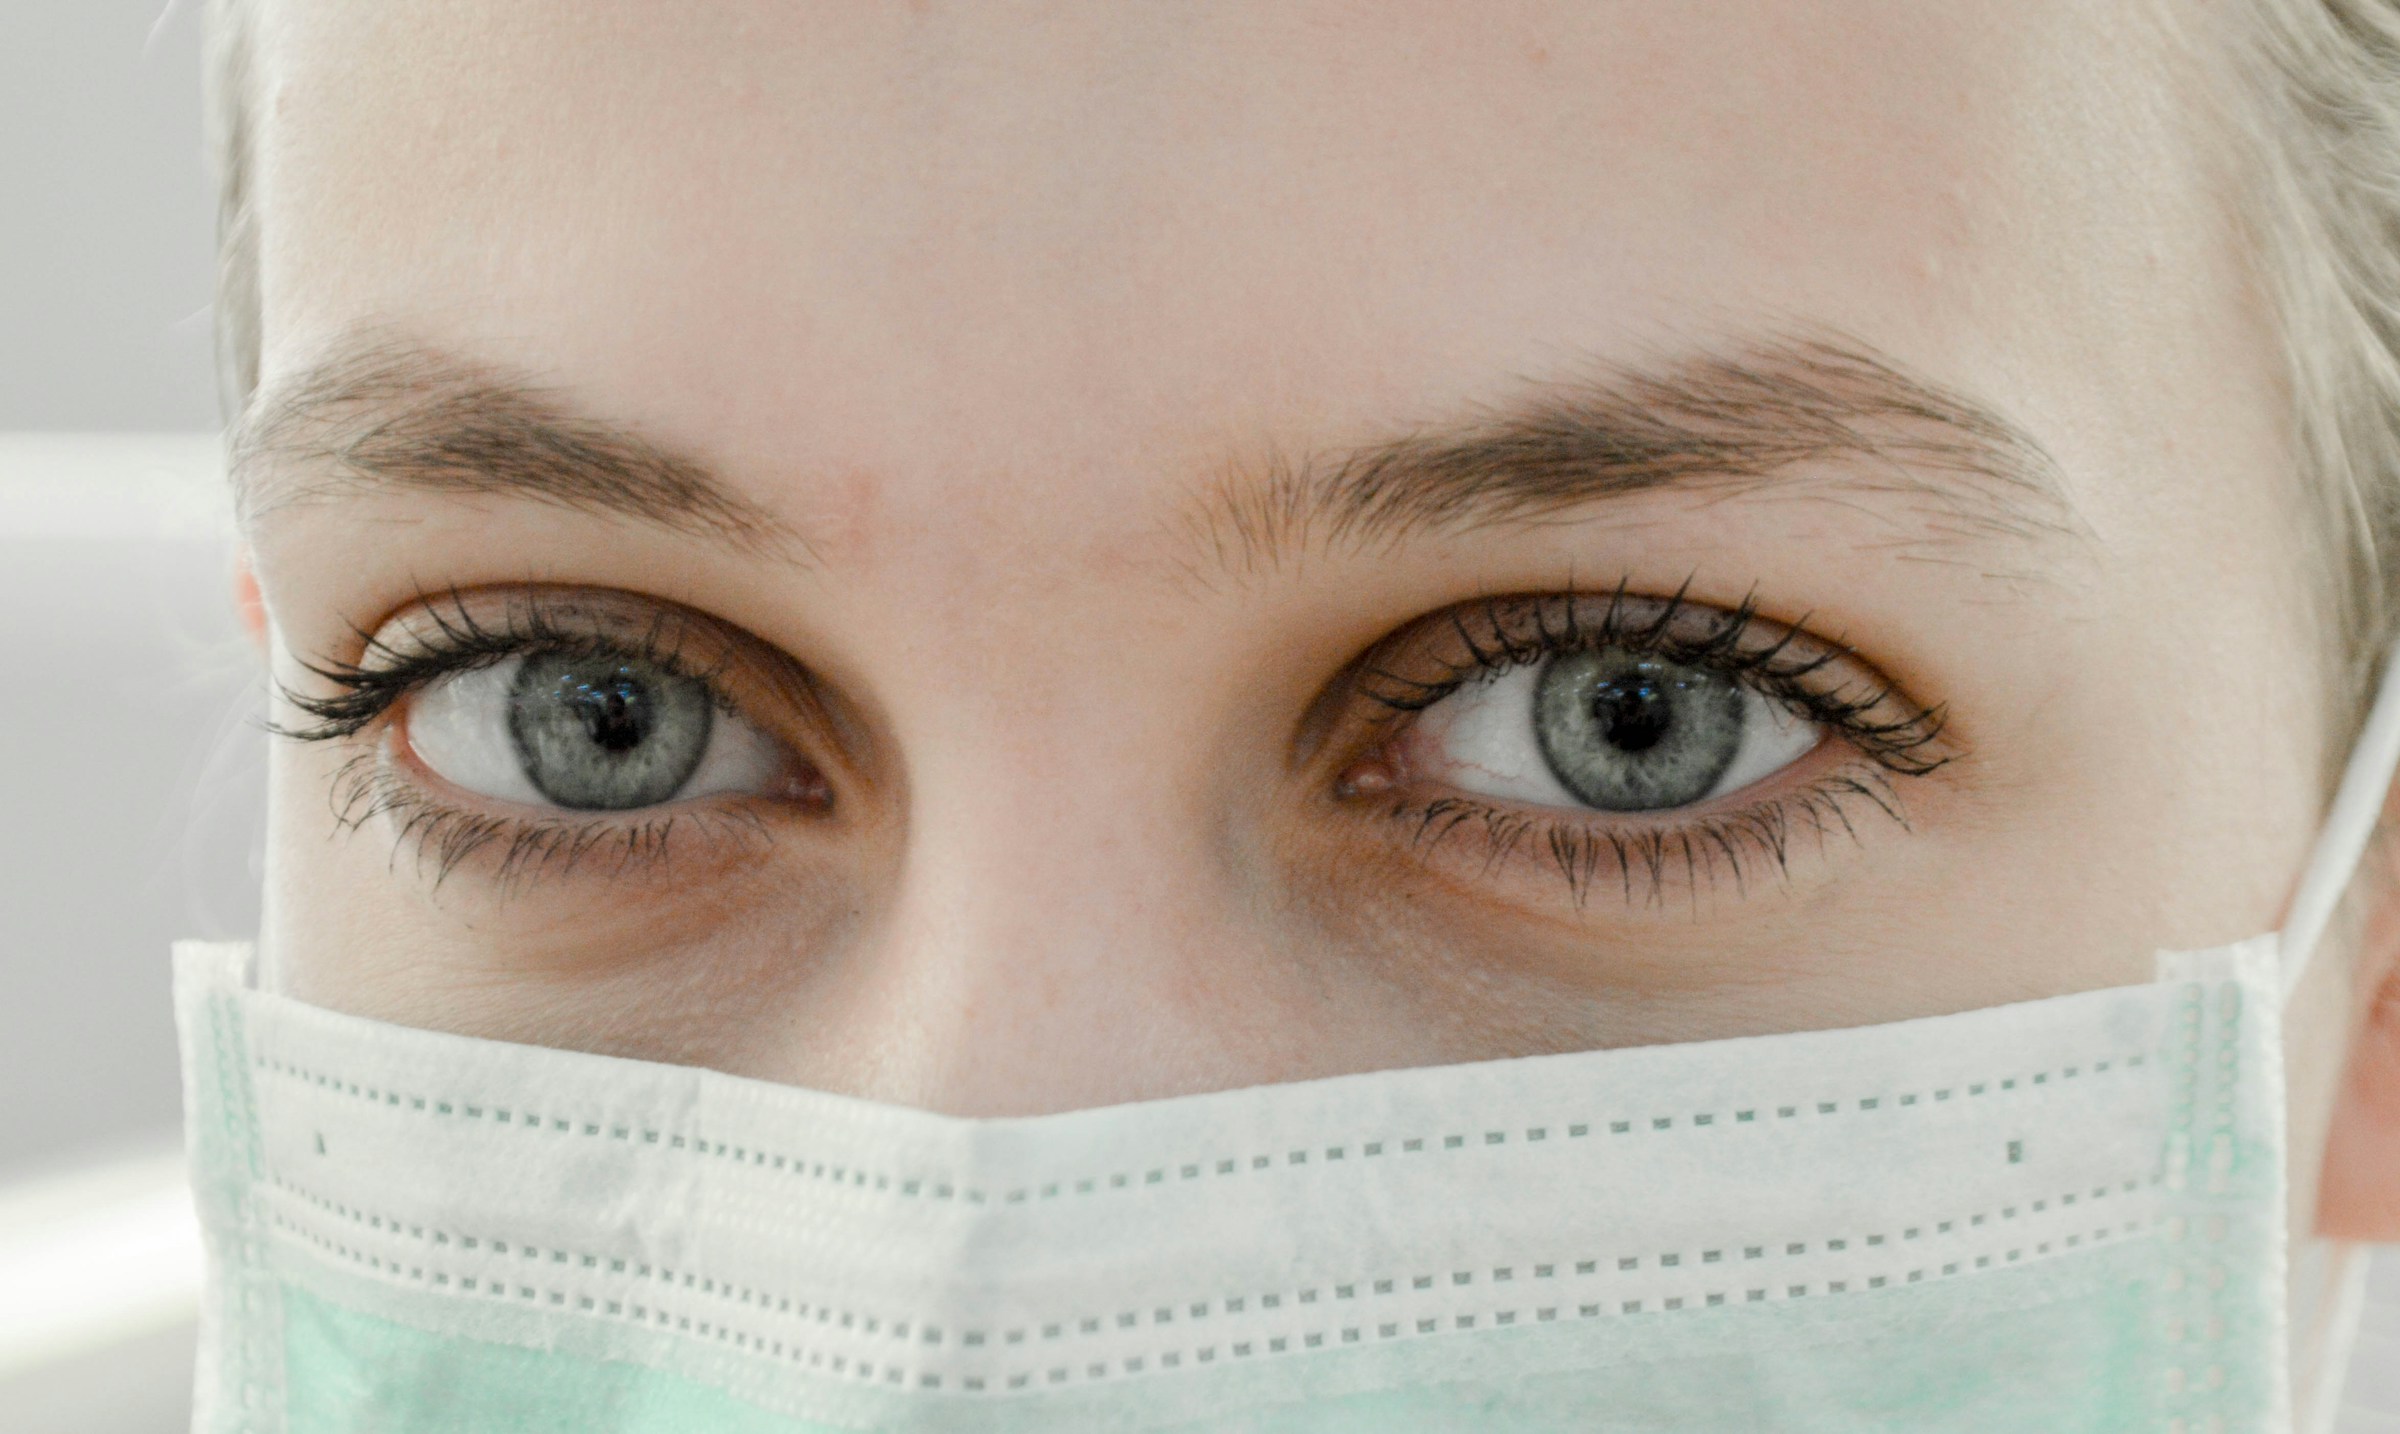 A healthcare specialist wearing a mask | Source: Unsplash